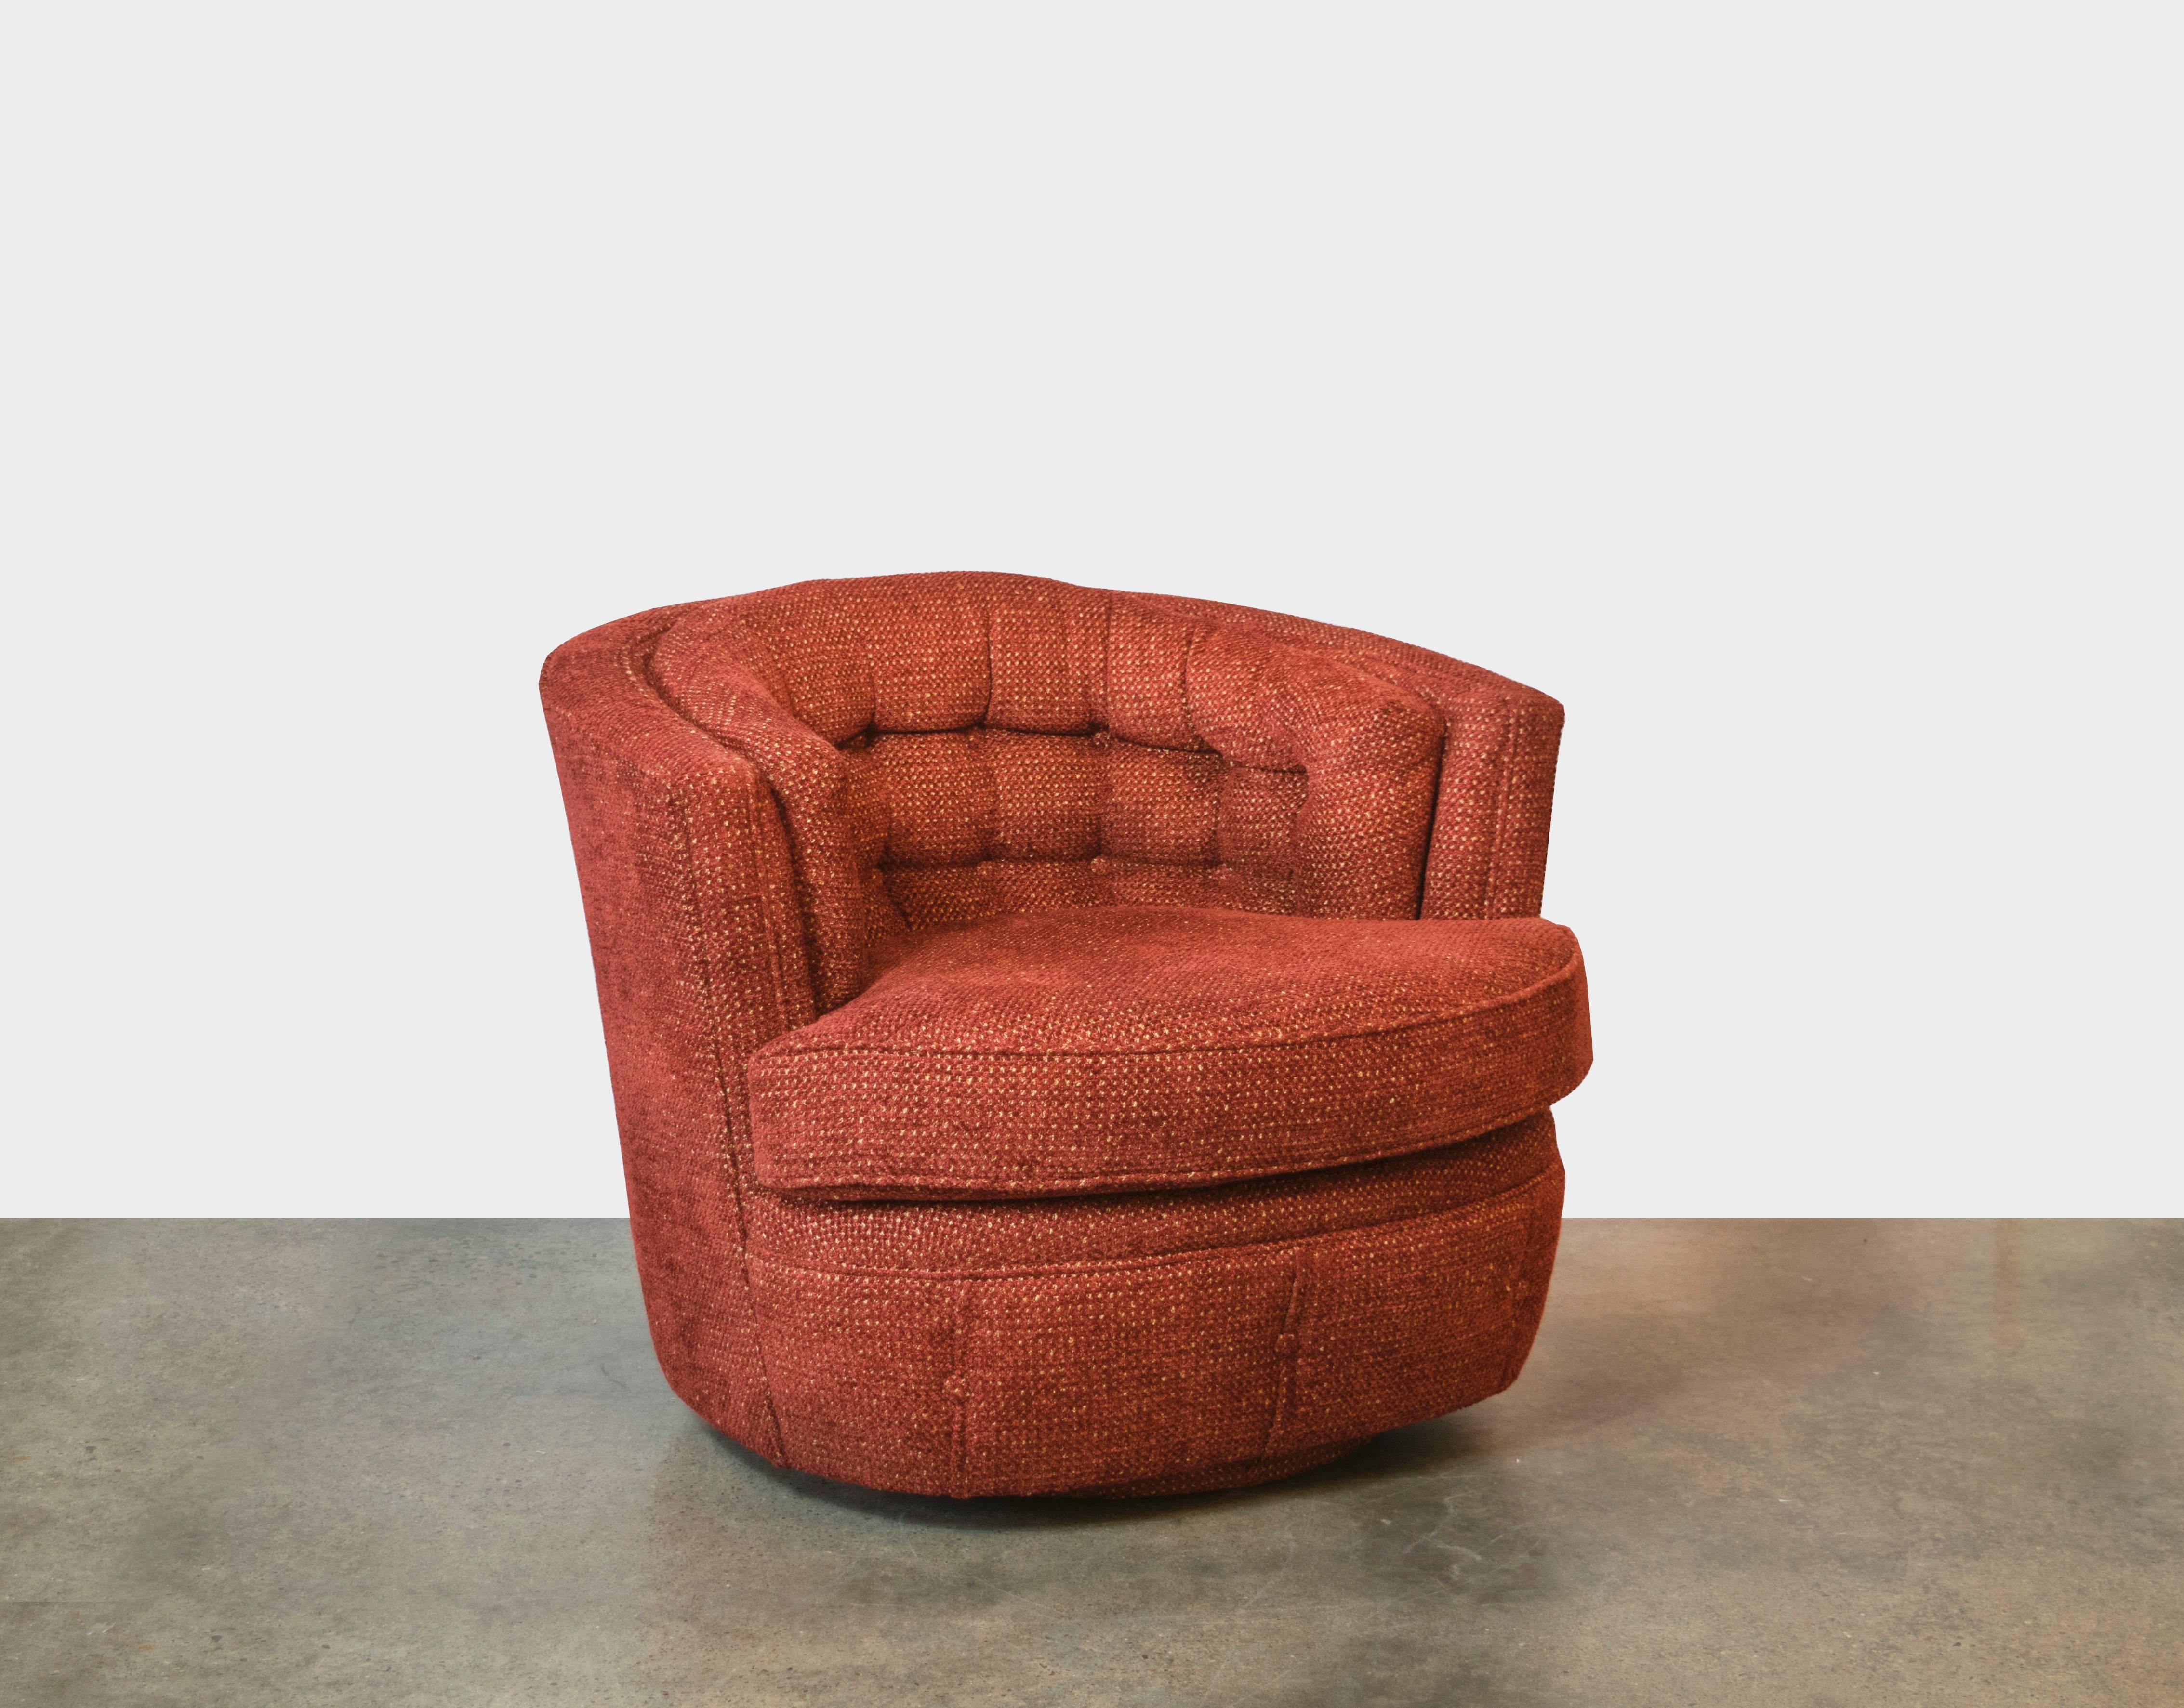 Everybody loves swivel chairs, especially those designed by Milo Baughman. This pair has been recently reupholstered in Knoll Textiles Coco Chenille, color way brick. Excellent back cushion tufting makes these chairs extremely comfortable - would be